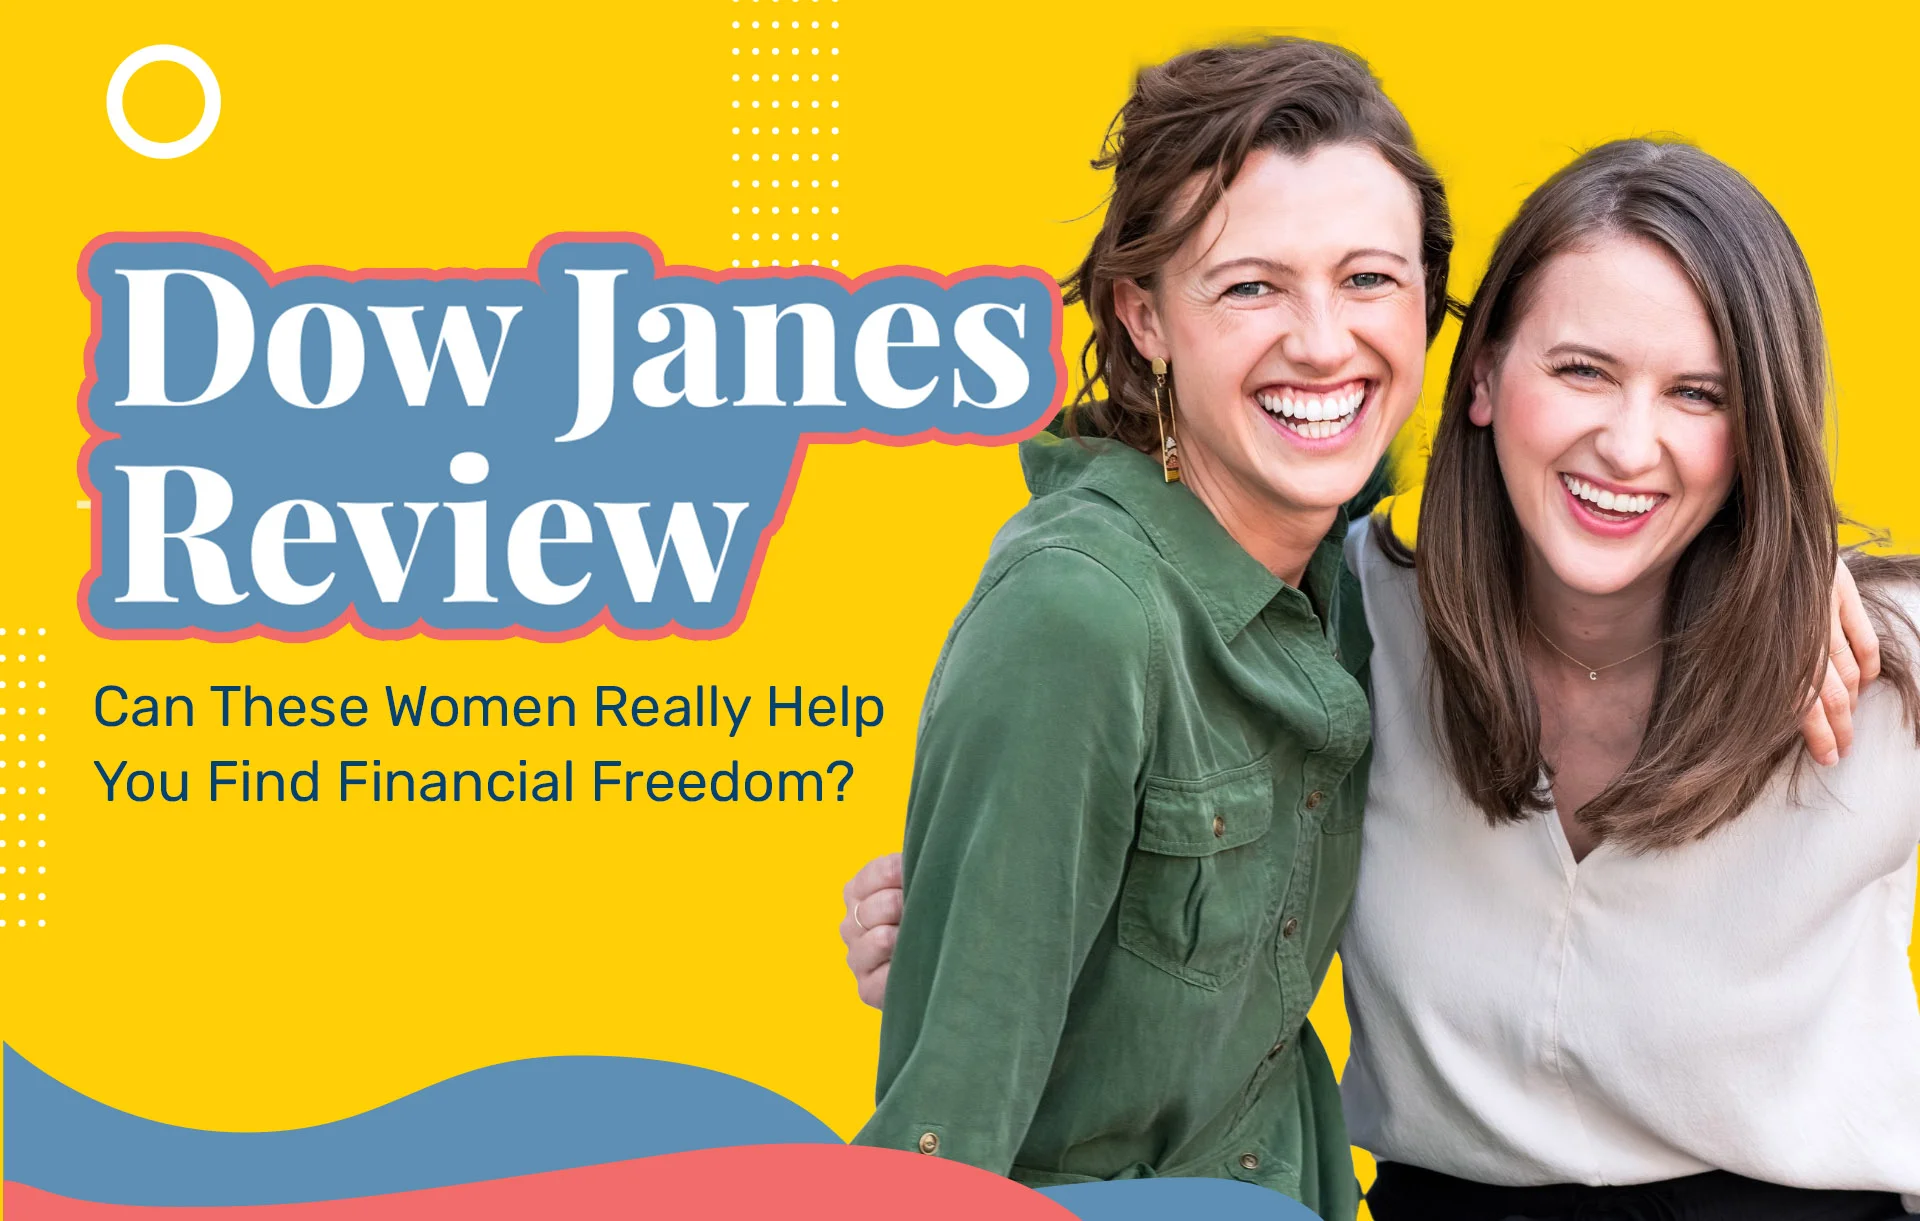 Dow Janes Reviews: Can These Women Really Help You Find Financial Freedom?